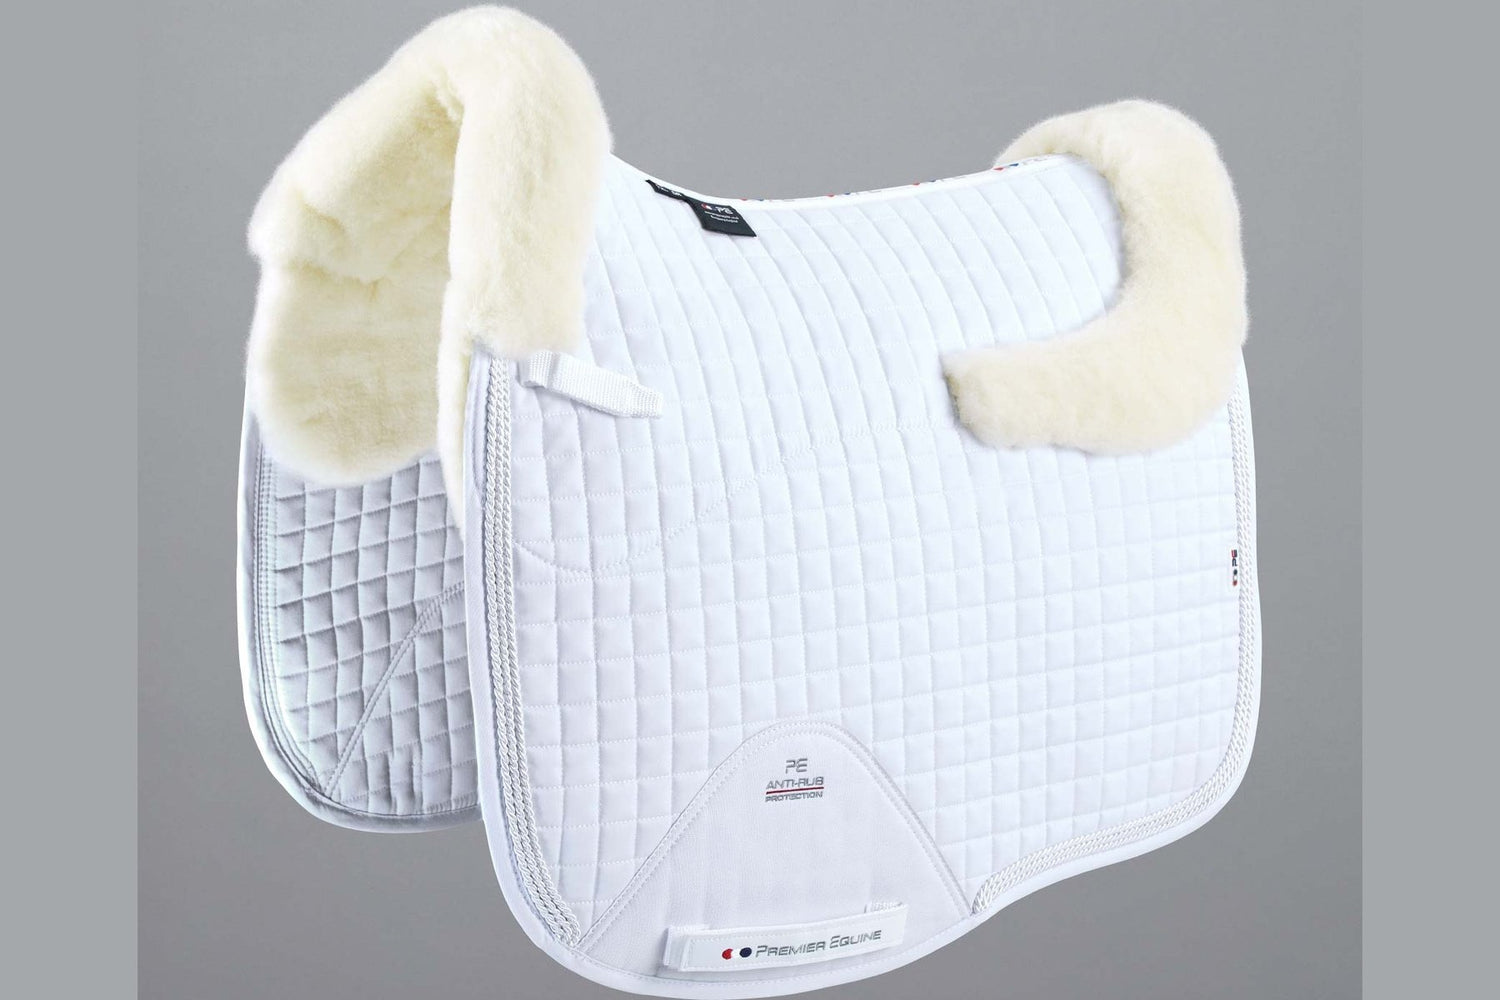 Description:Pony Close Contact Merino Wool Half Lined European Dressage Square_Colour:White/Natural Wool_Position:1